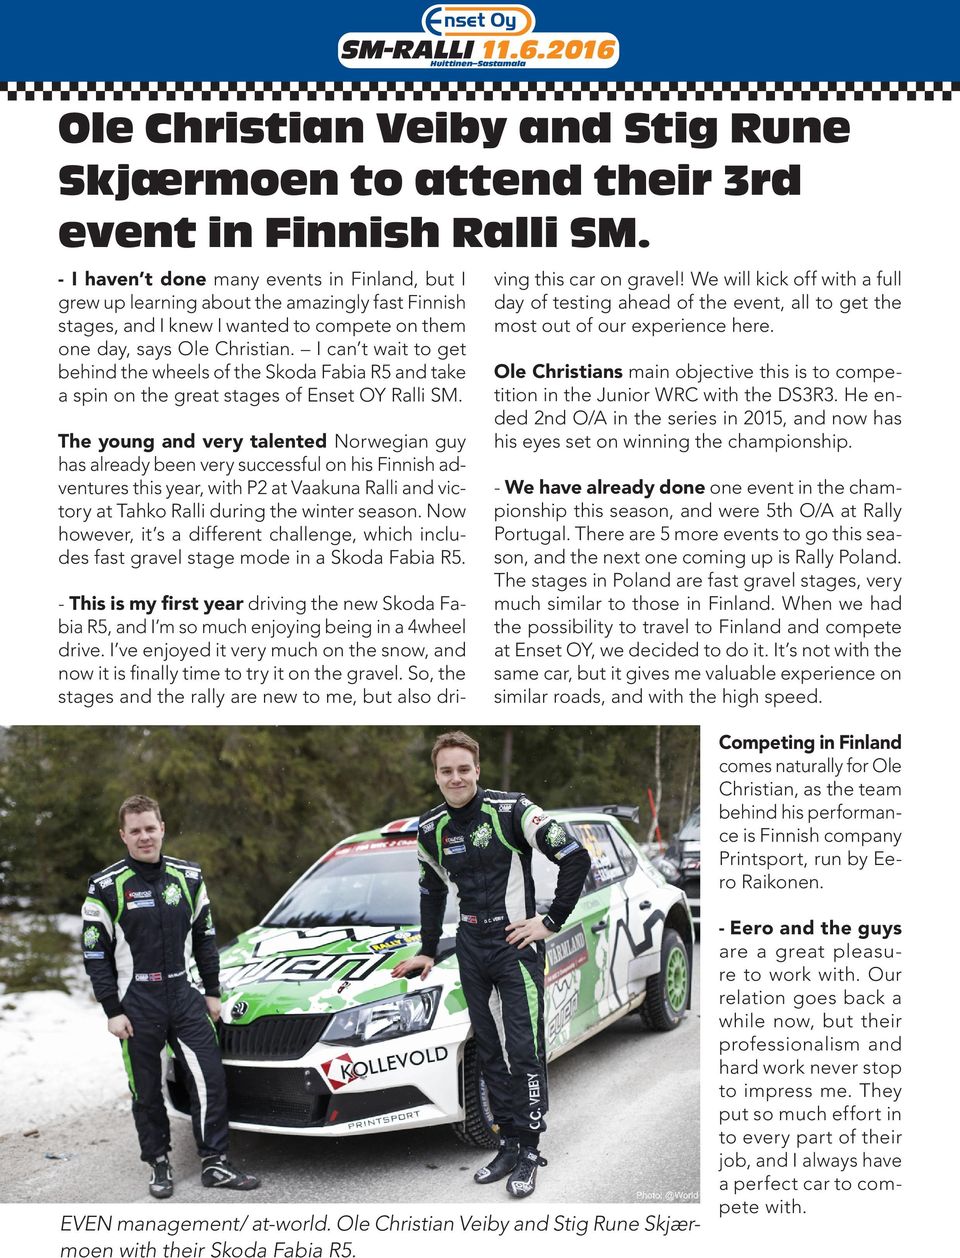 I can t wait to get behind the wheels of the Skoda Fabia R5 and take a spin on the great stages of Enset OY Ralli SM.